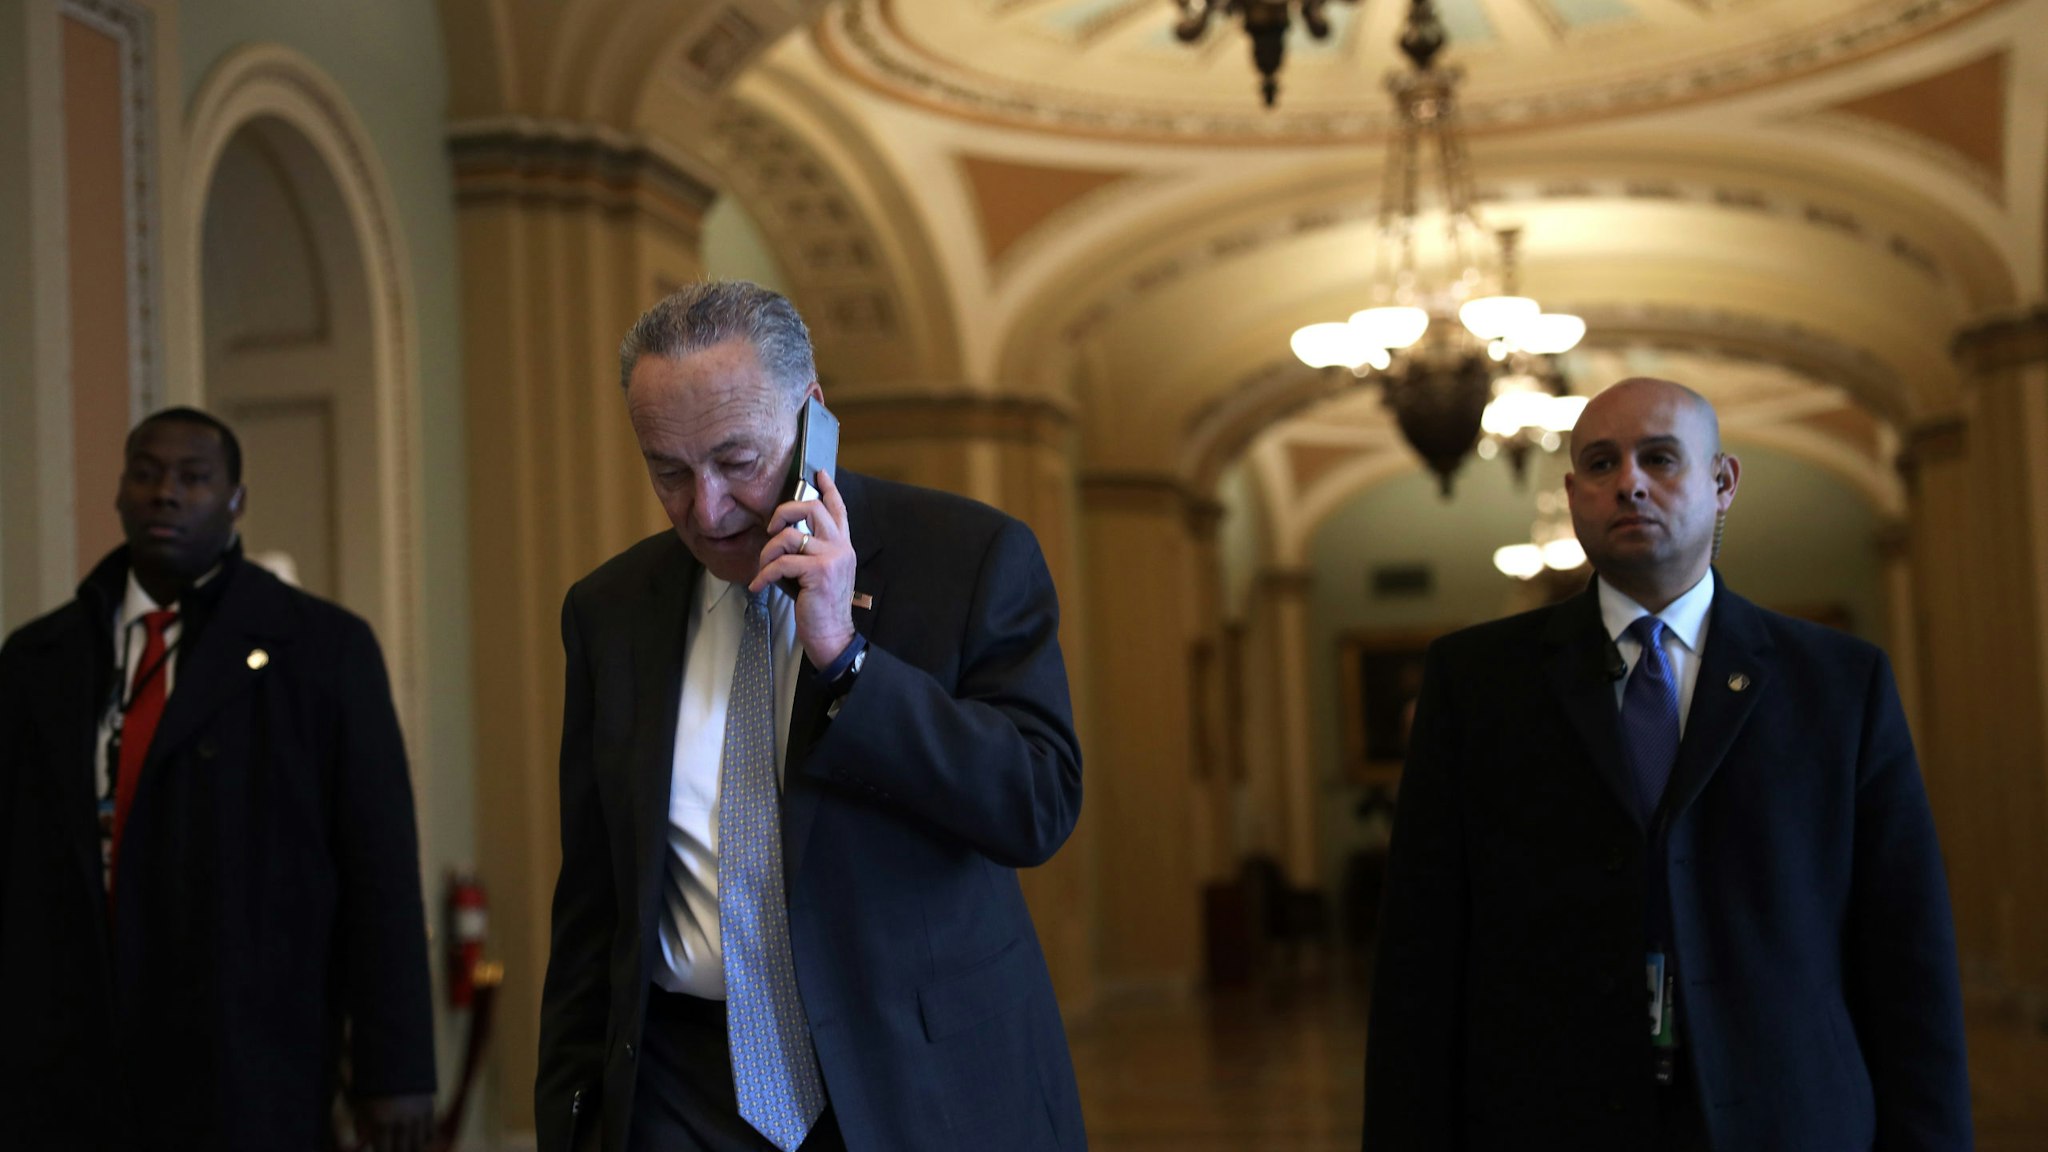 WASHINGTON, DC - JANUARY 23: U.S. Senate Minority Leader Sen. Chuck Schumer (D-NY) arrives at the U.S. Capitol January 23, 2020 in Washington, DC. House Democrats continue opening arguments on day 3 of the Senate impeachment trial against President Donald Trump. (Photo by Alex Wong/Getty Images)